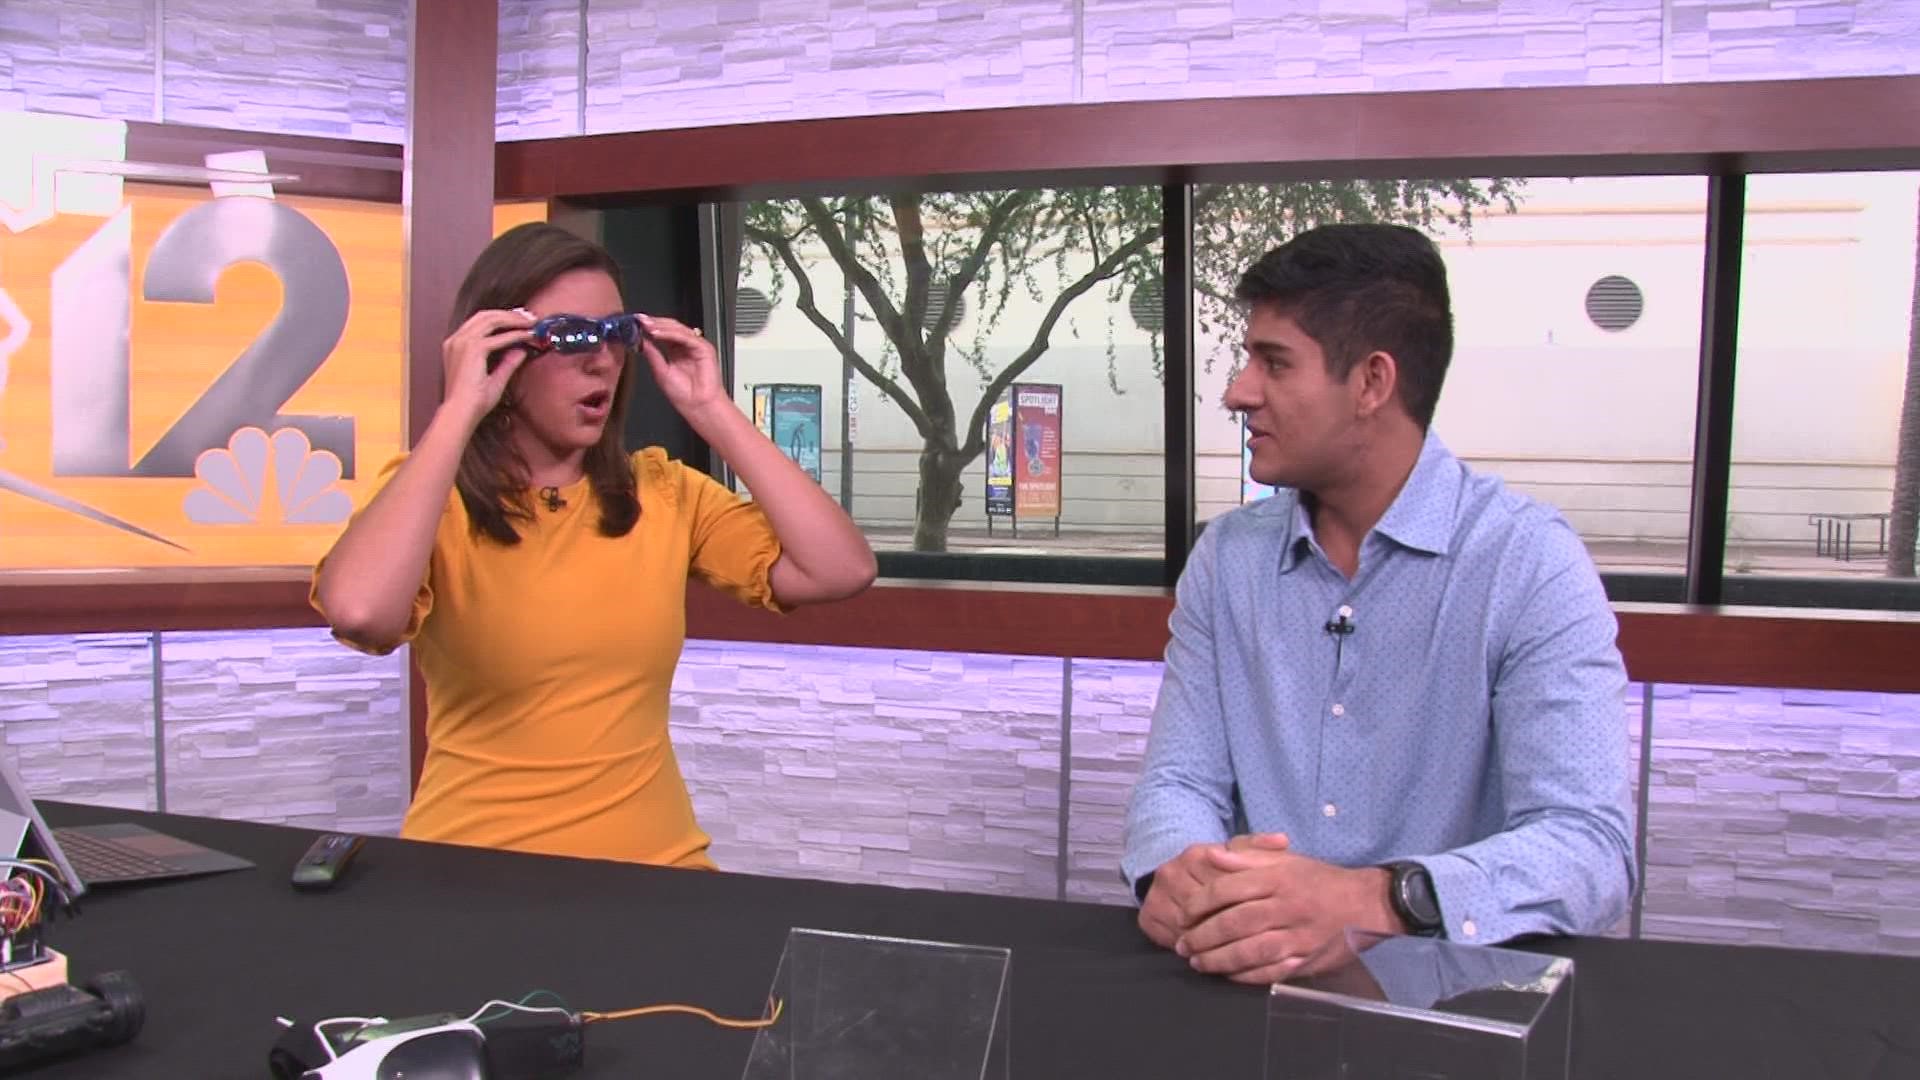 Mars Kapadia is a Valley teen with some amazing inventions. Emily Pritchard chats with the teen about his new smart glasses on Today in AZ.